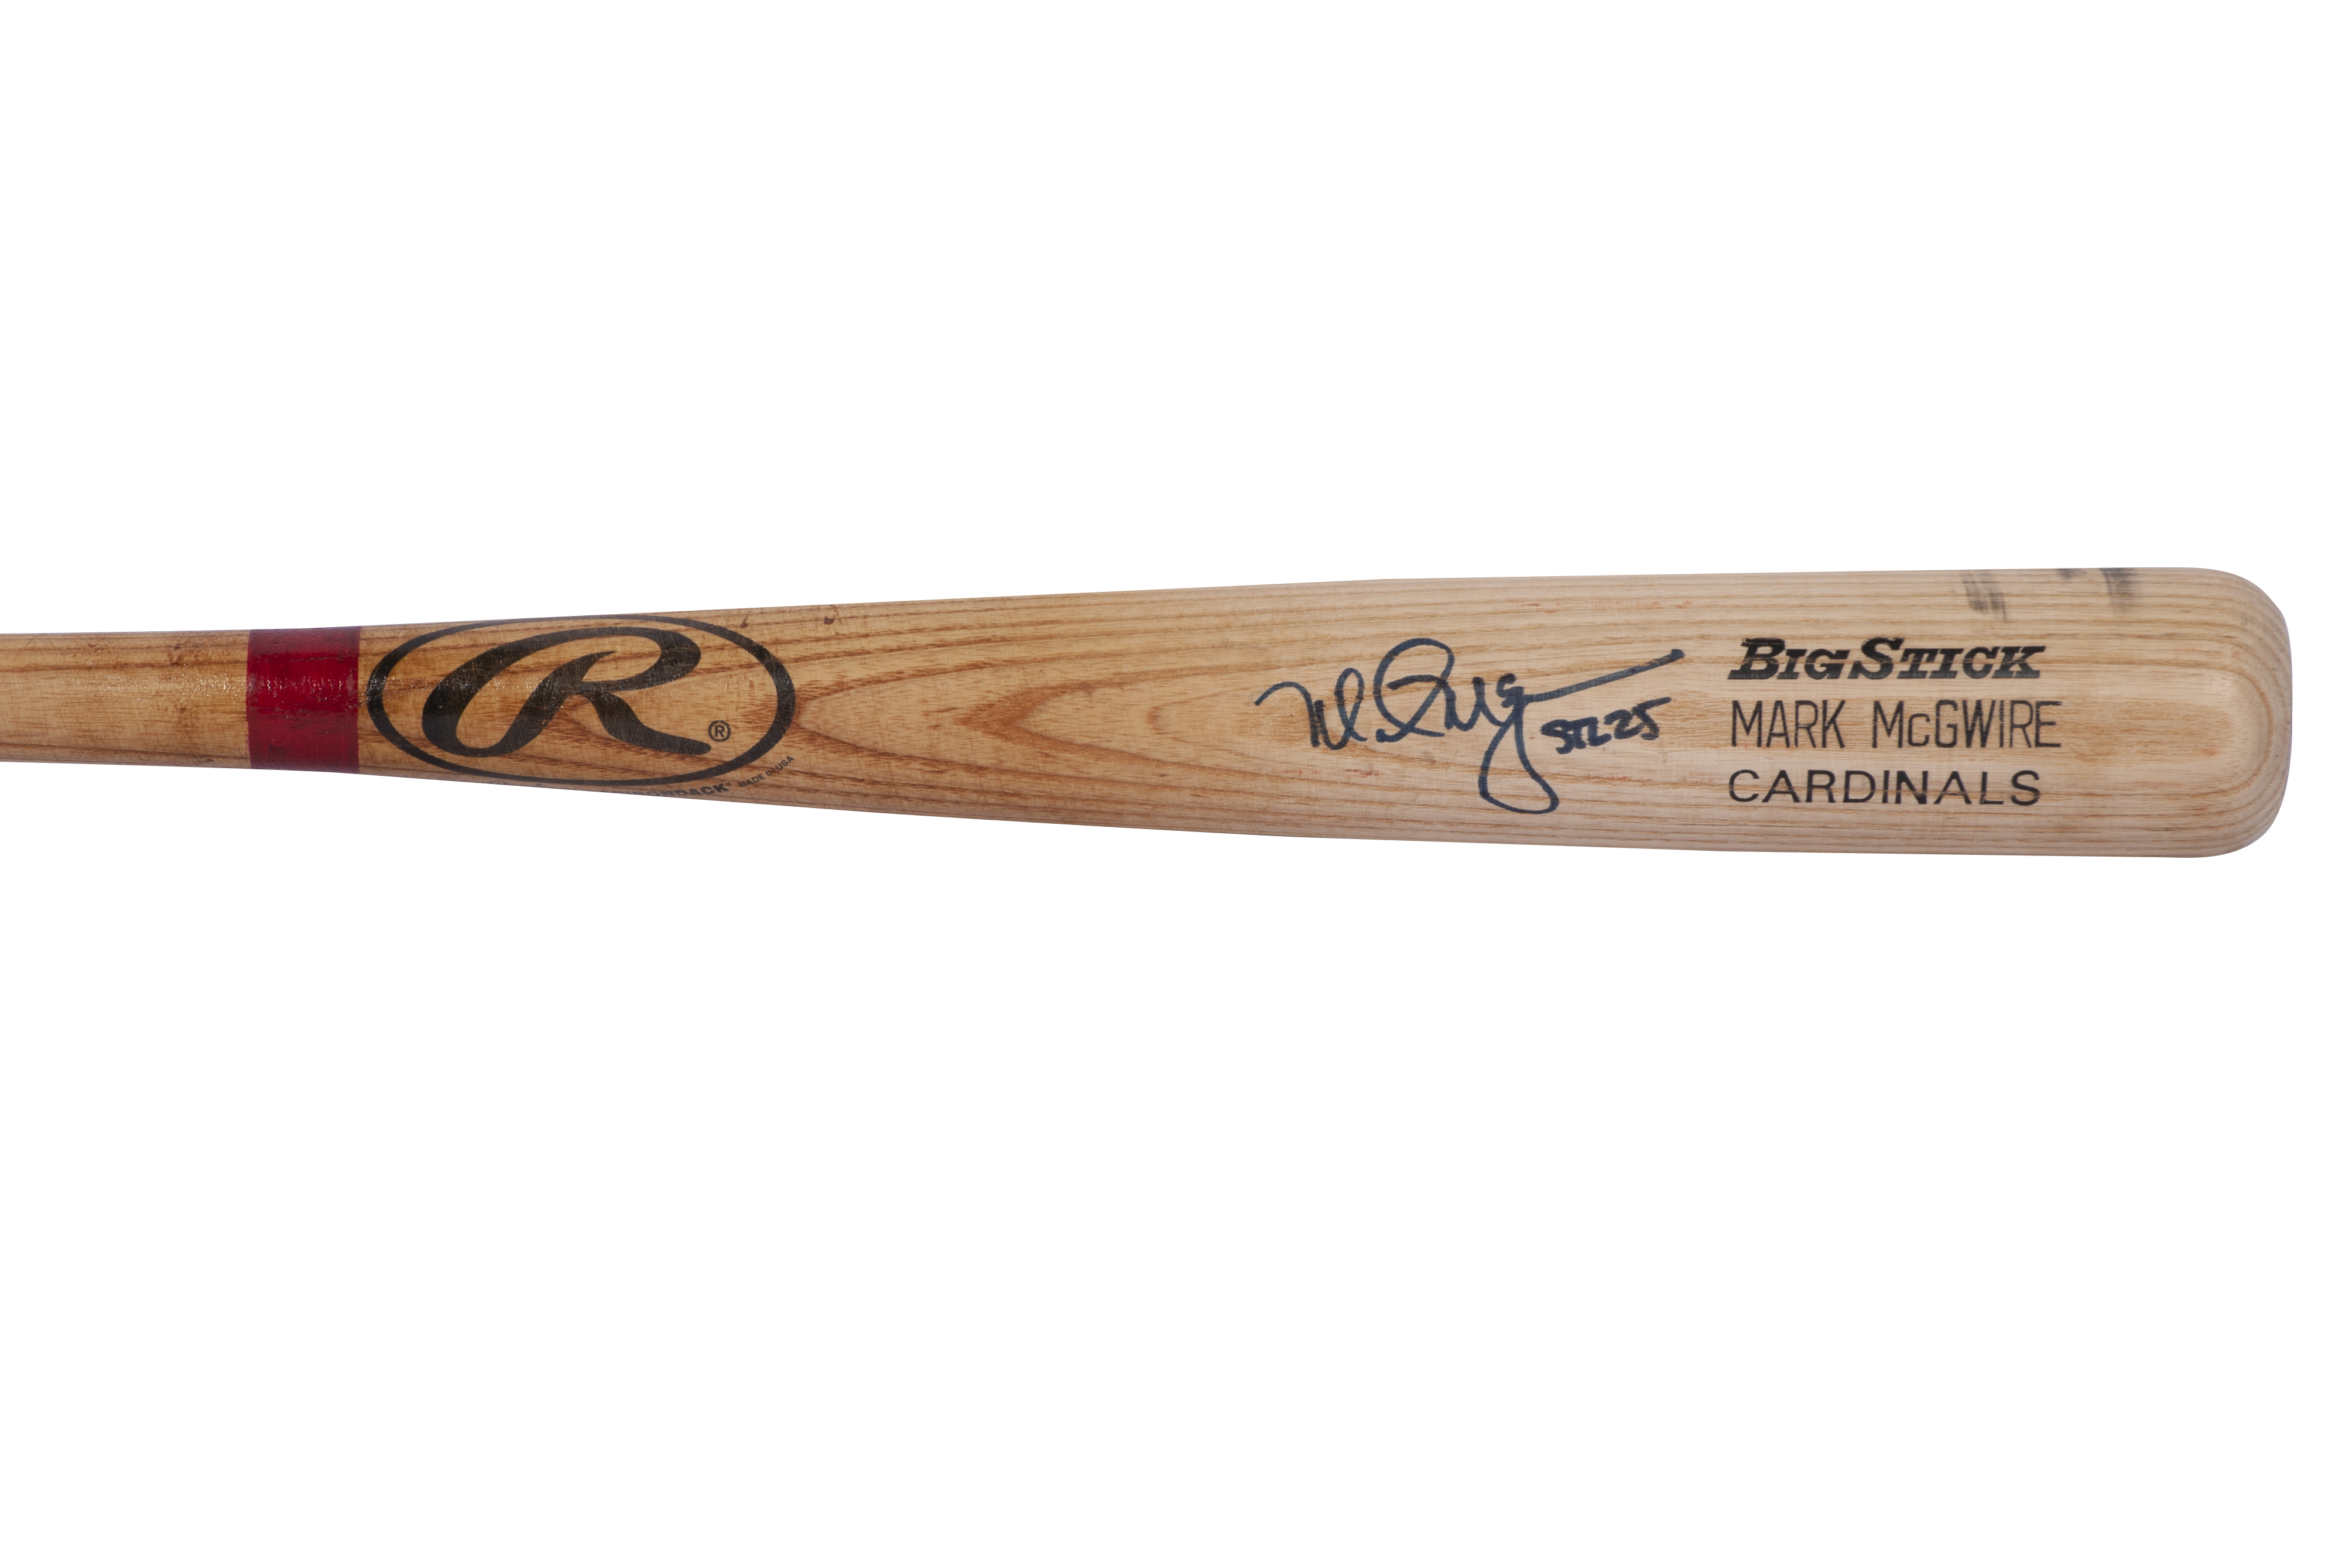 1998 Mark McGwire Game Used Signed & Inscribed Adirondack Bat From His  Record 70-HR Season - PSA/DNA GU 10, LARUSSA LOA, & RESOLUTION PHOTOMATCHED  TO TWO GAMES! - PRICE REALIZED: $27,581 - SCP AUCTIONS